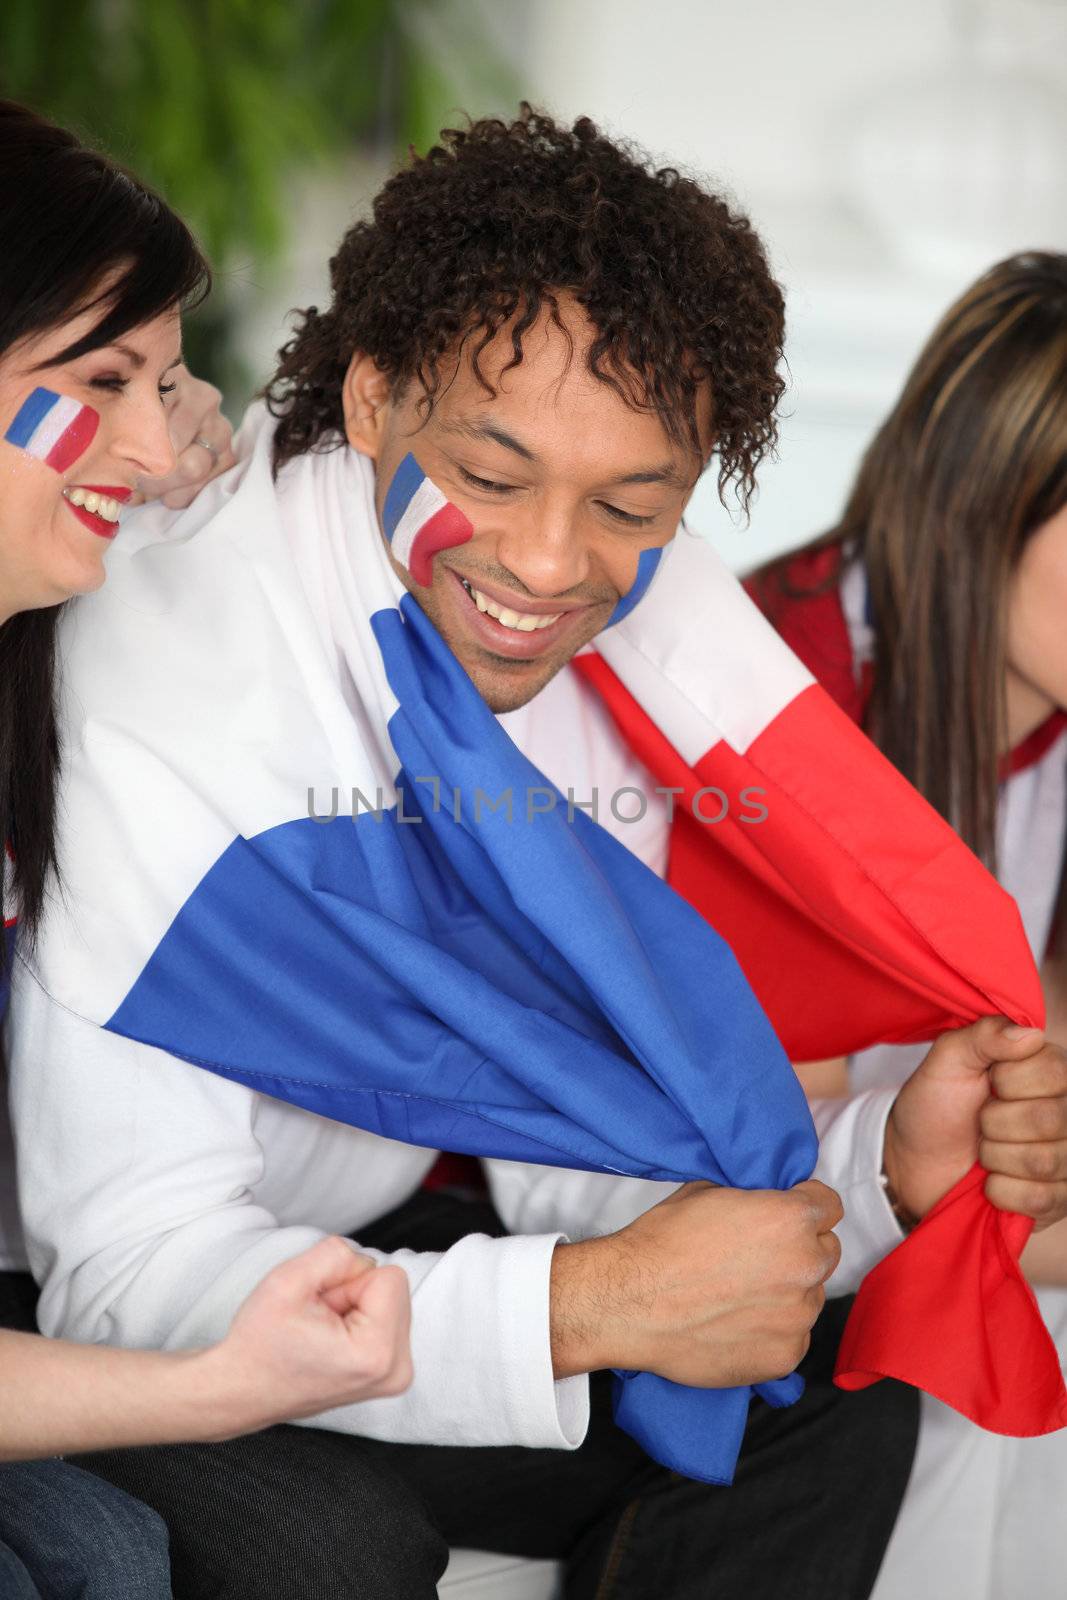 French supporters by phovoir